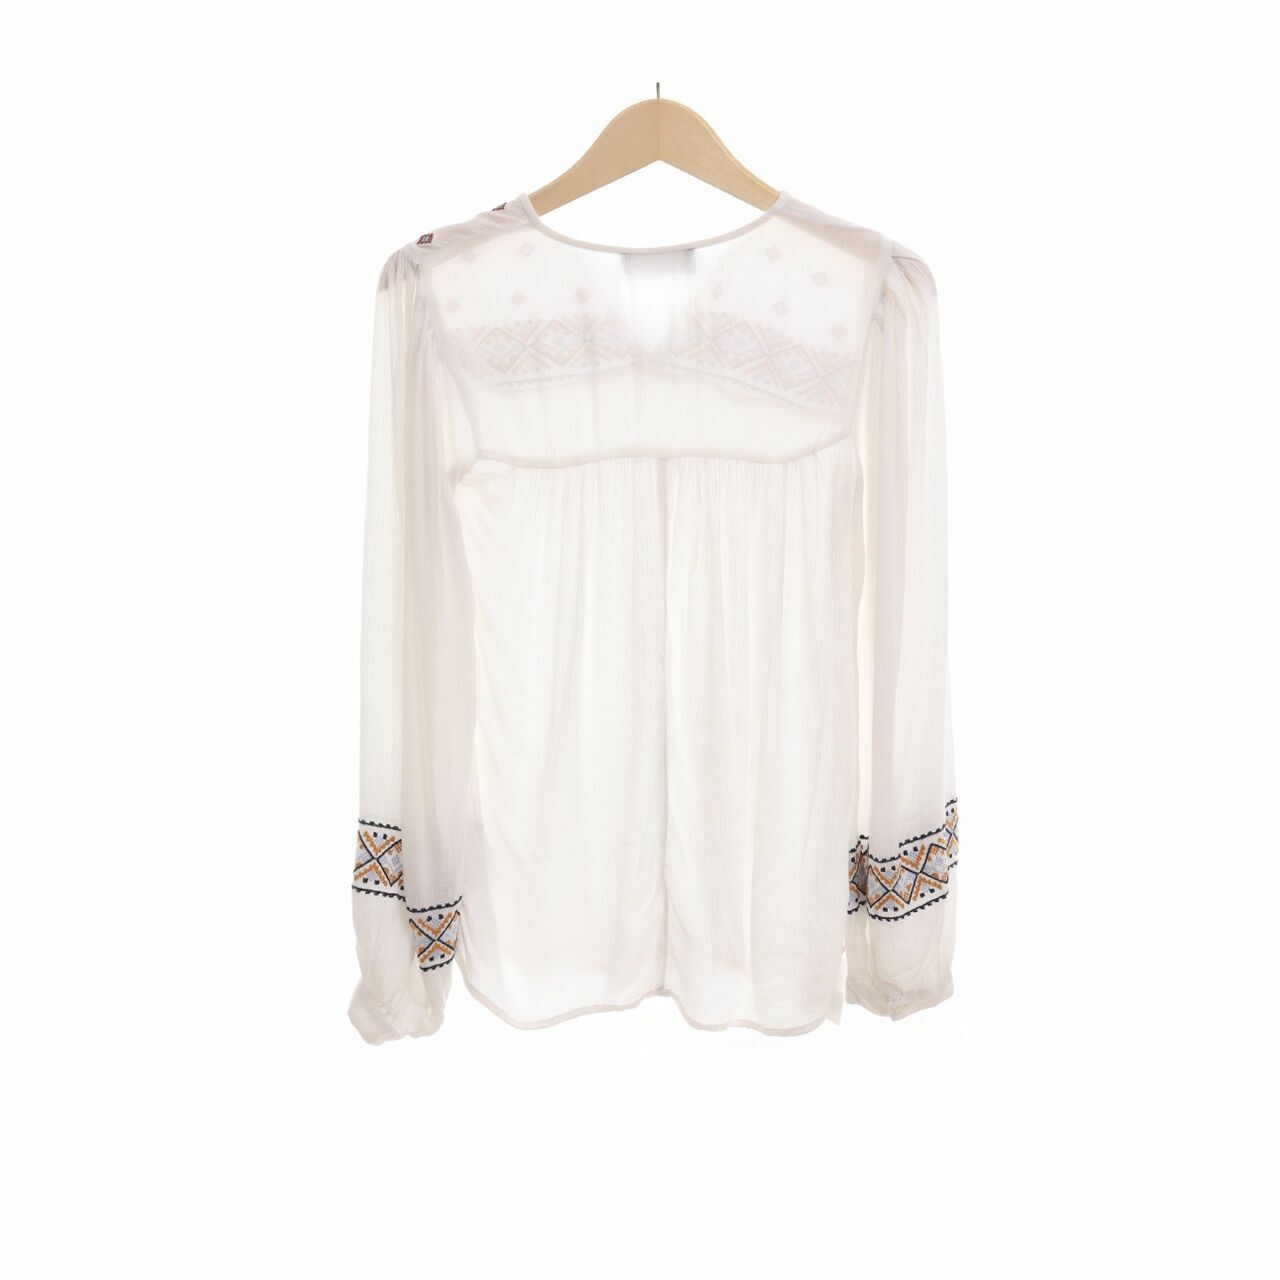 Marks & Spencer White Embroidery Blouse